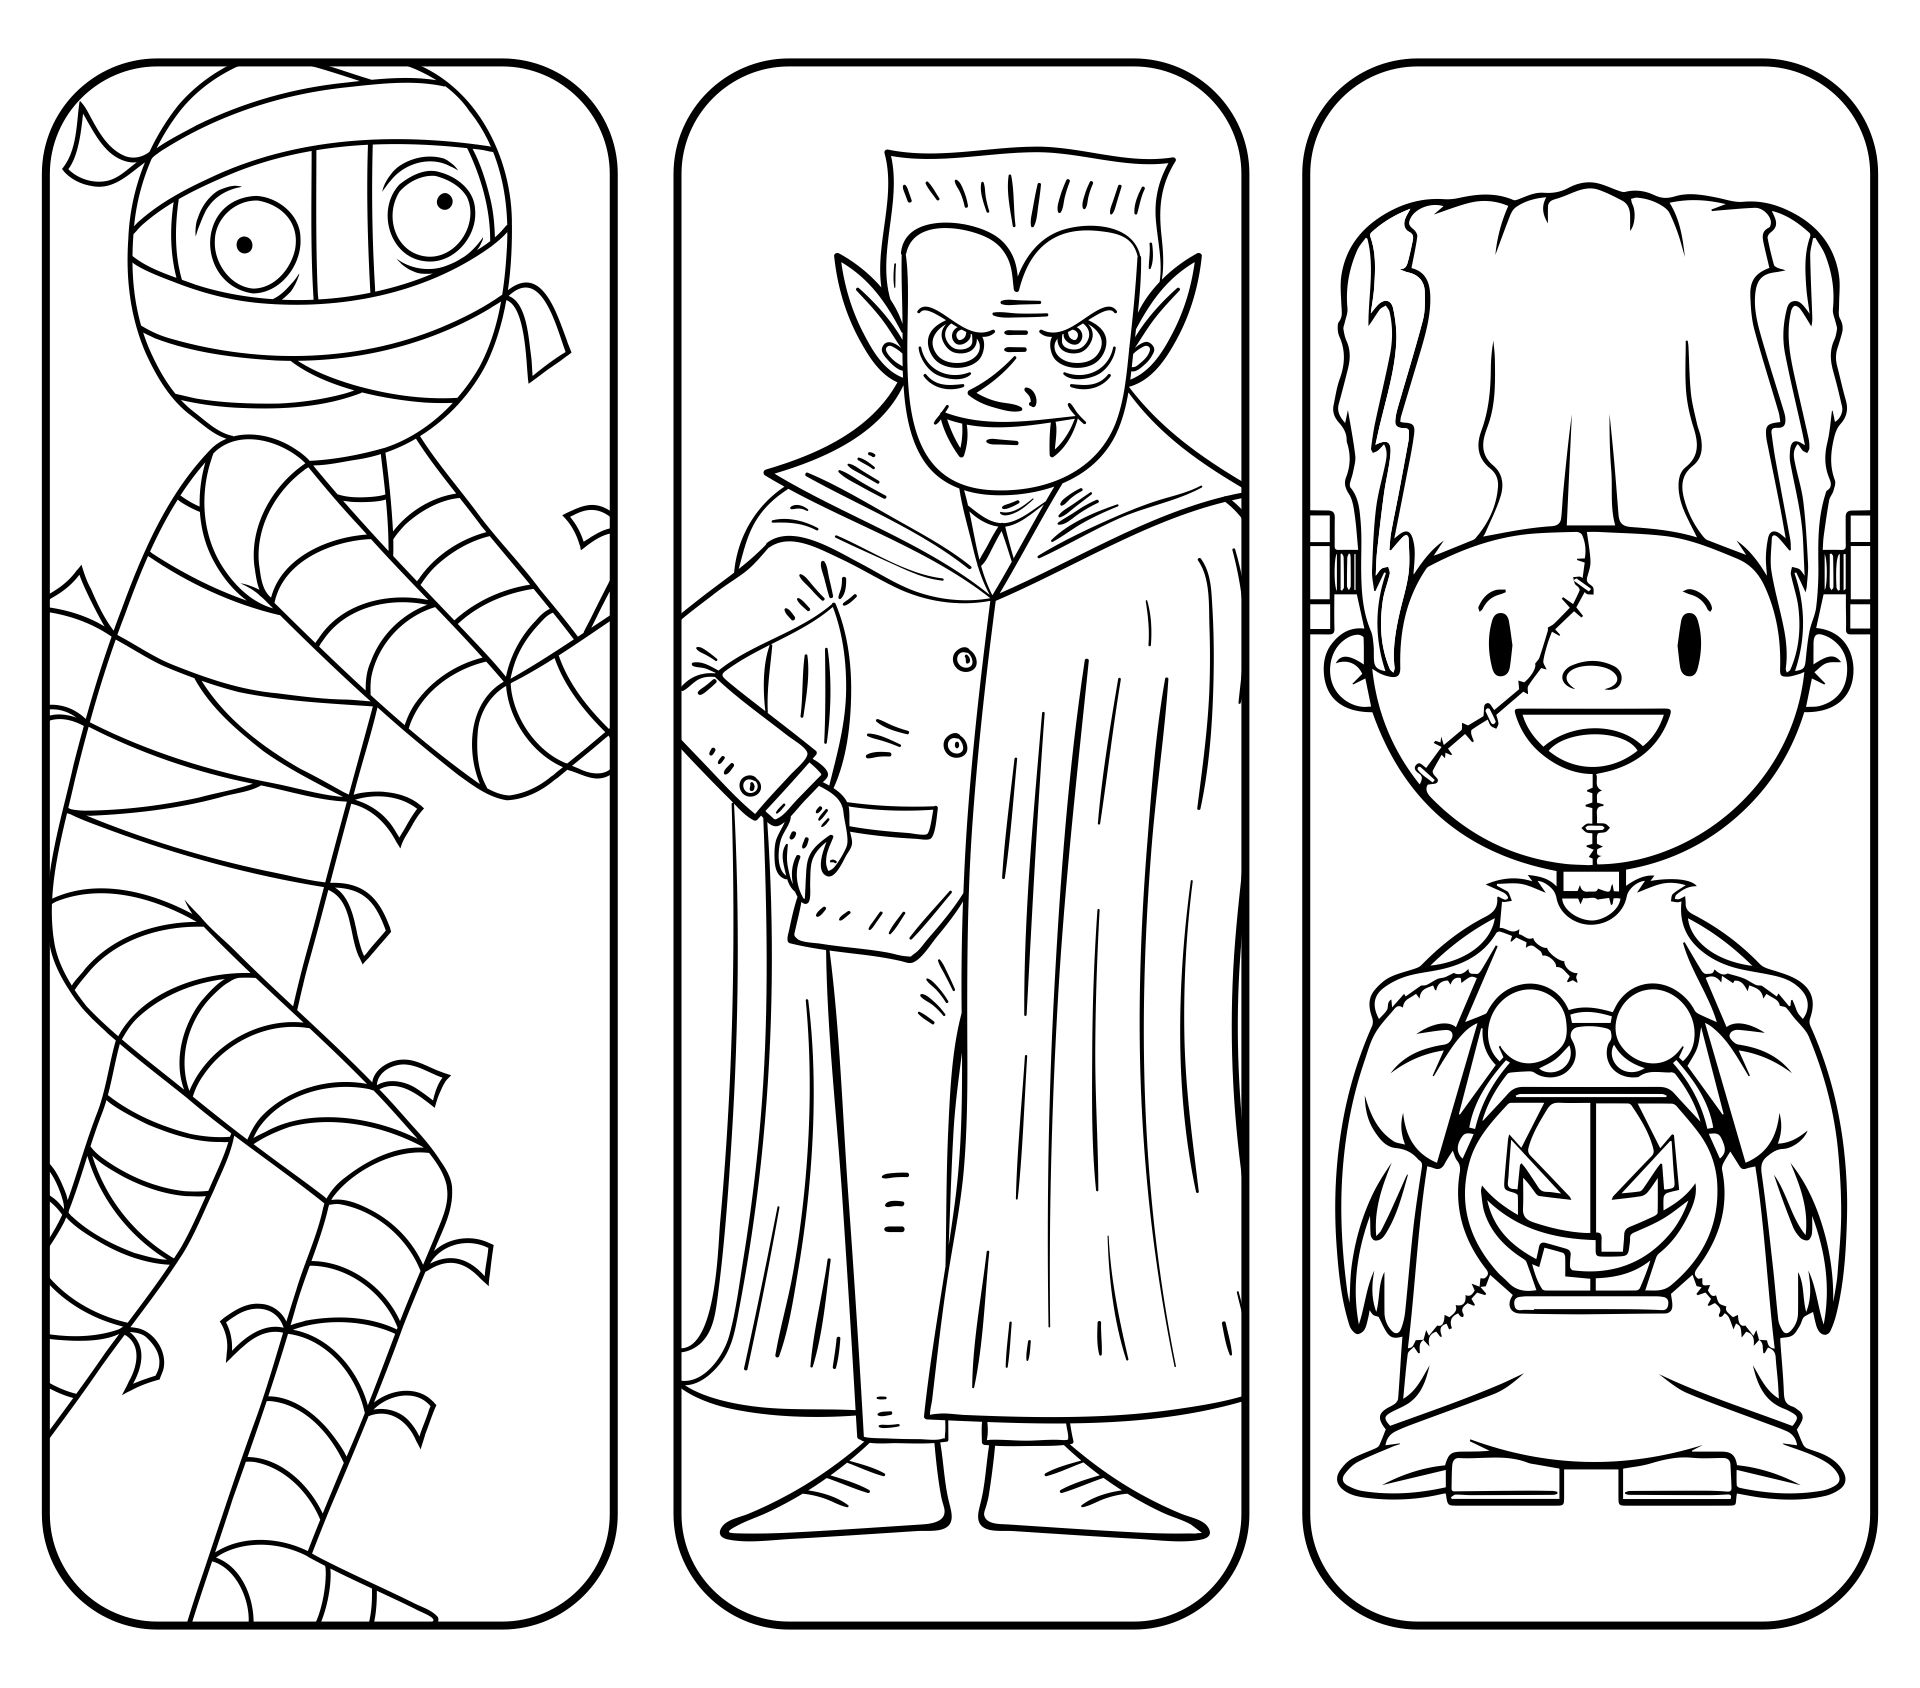 Printable Coloring Halloween Bookmarks To Color